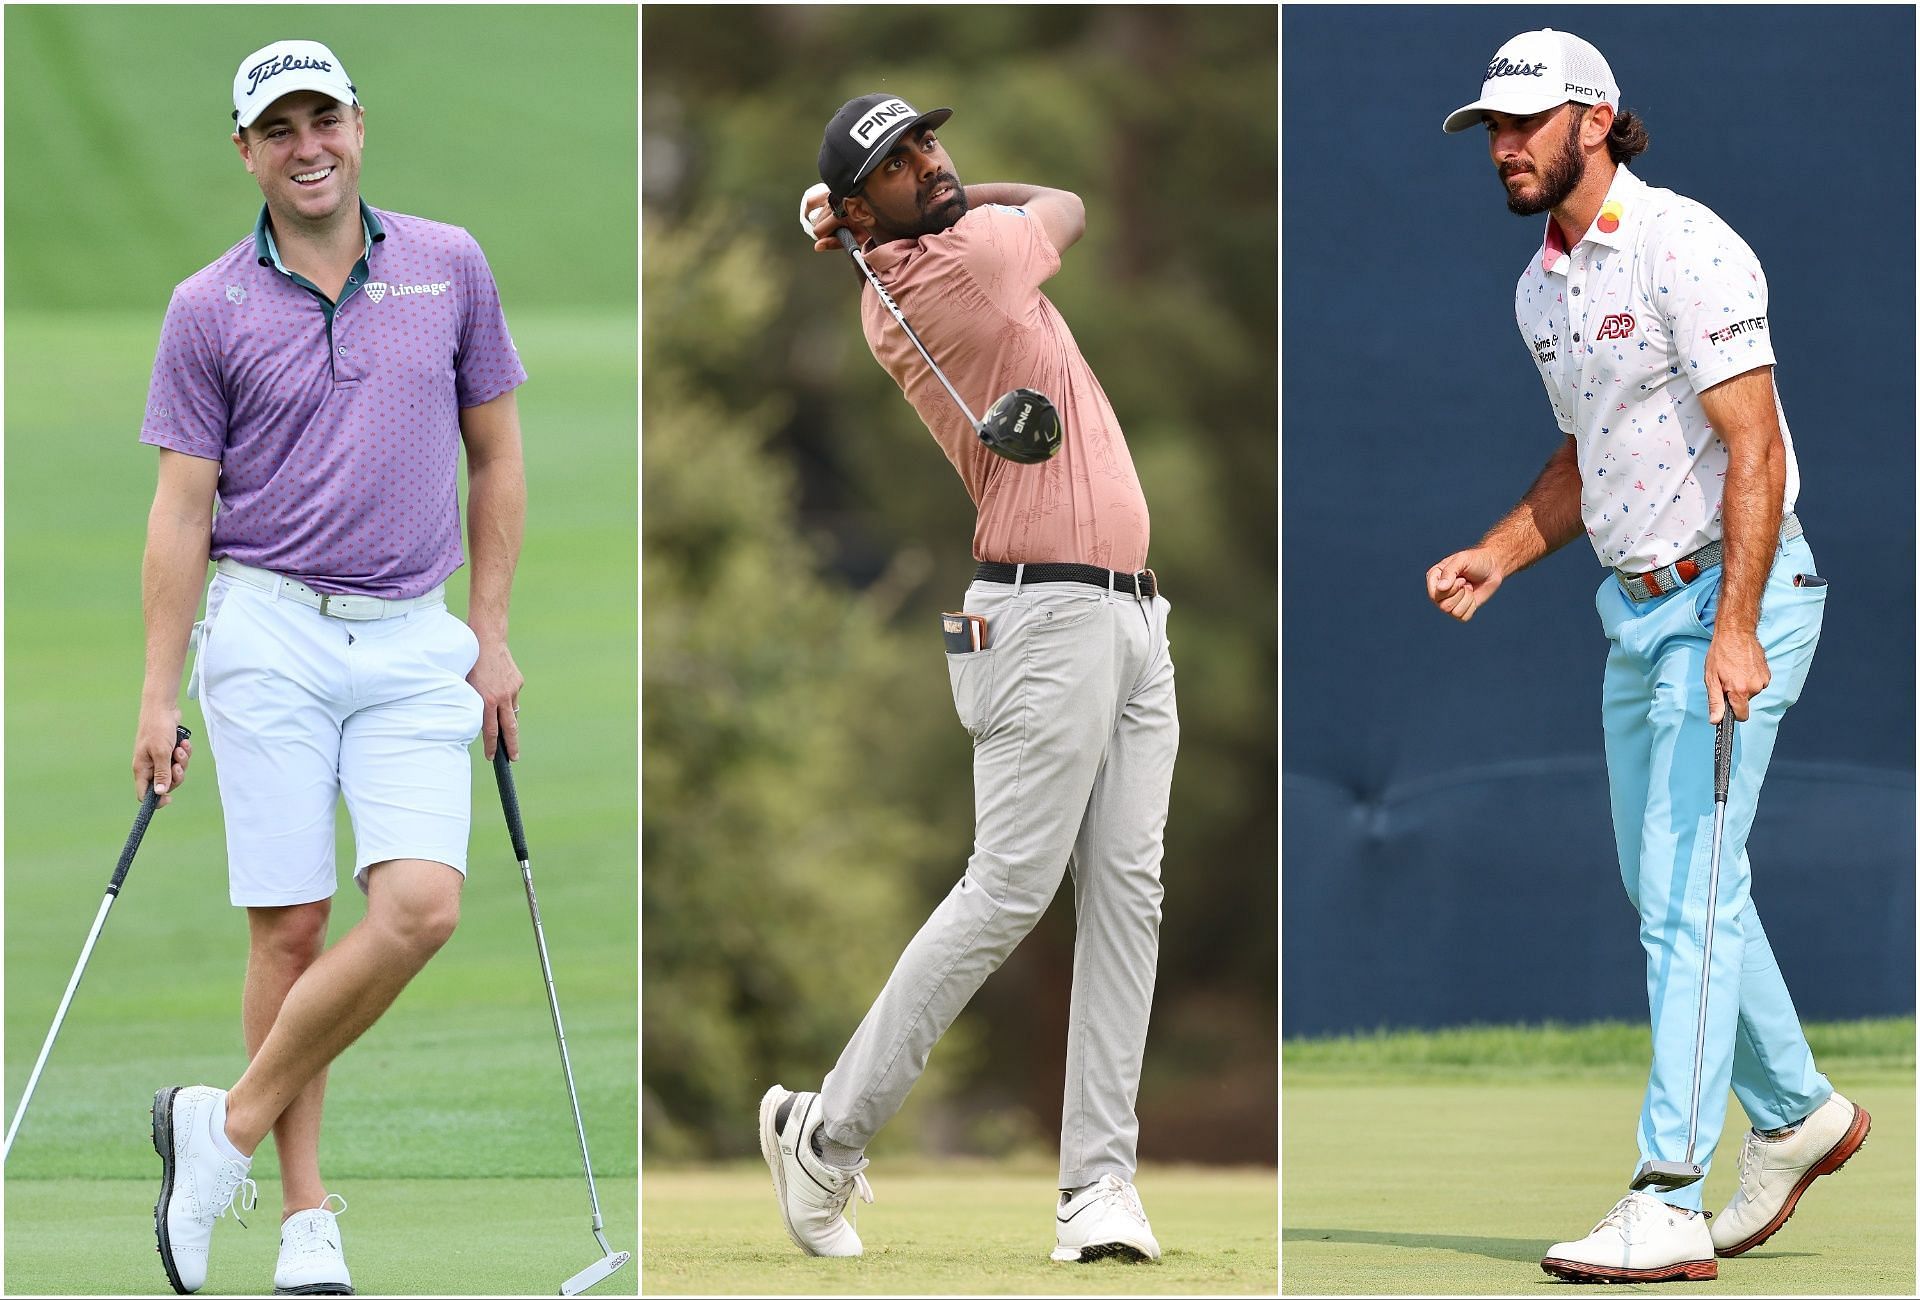 Justin Thomas, Sahith Theegala, and Max Homa, three of the top players in the field of 2023 Fortinet Championship (via Getty Images)